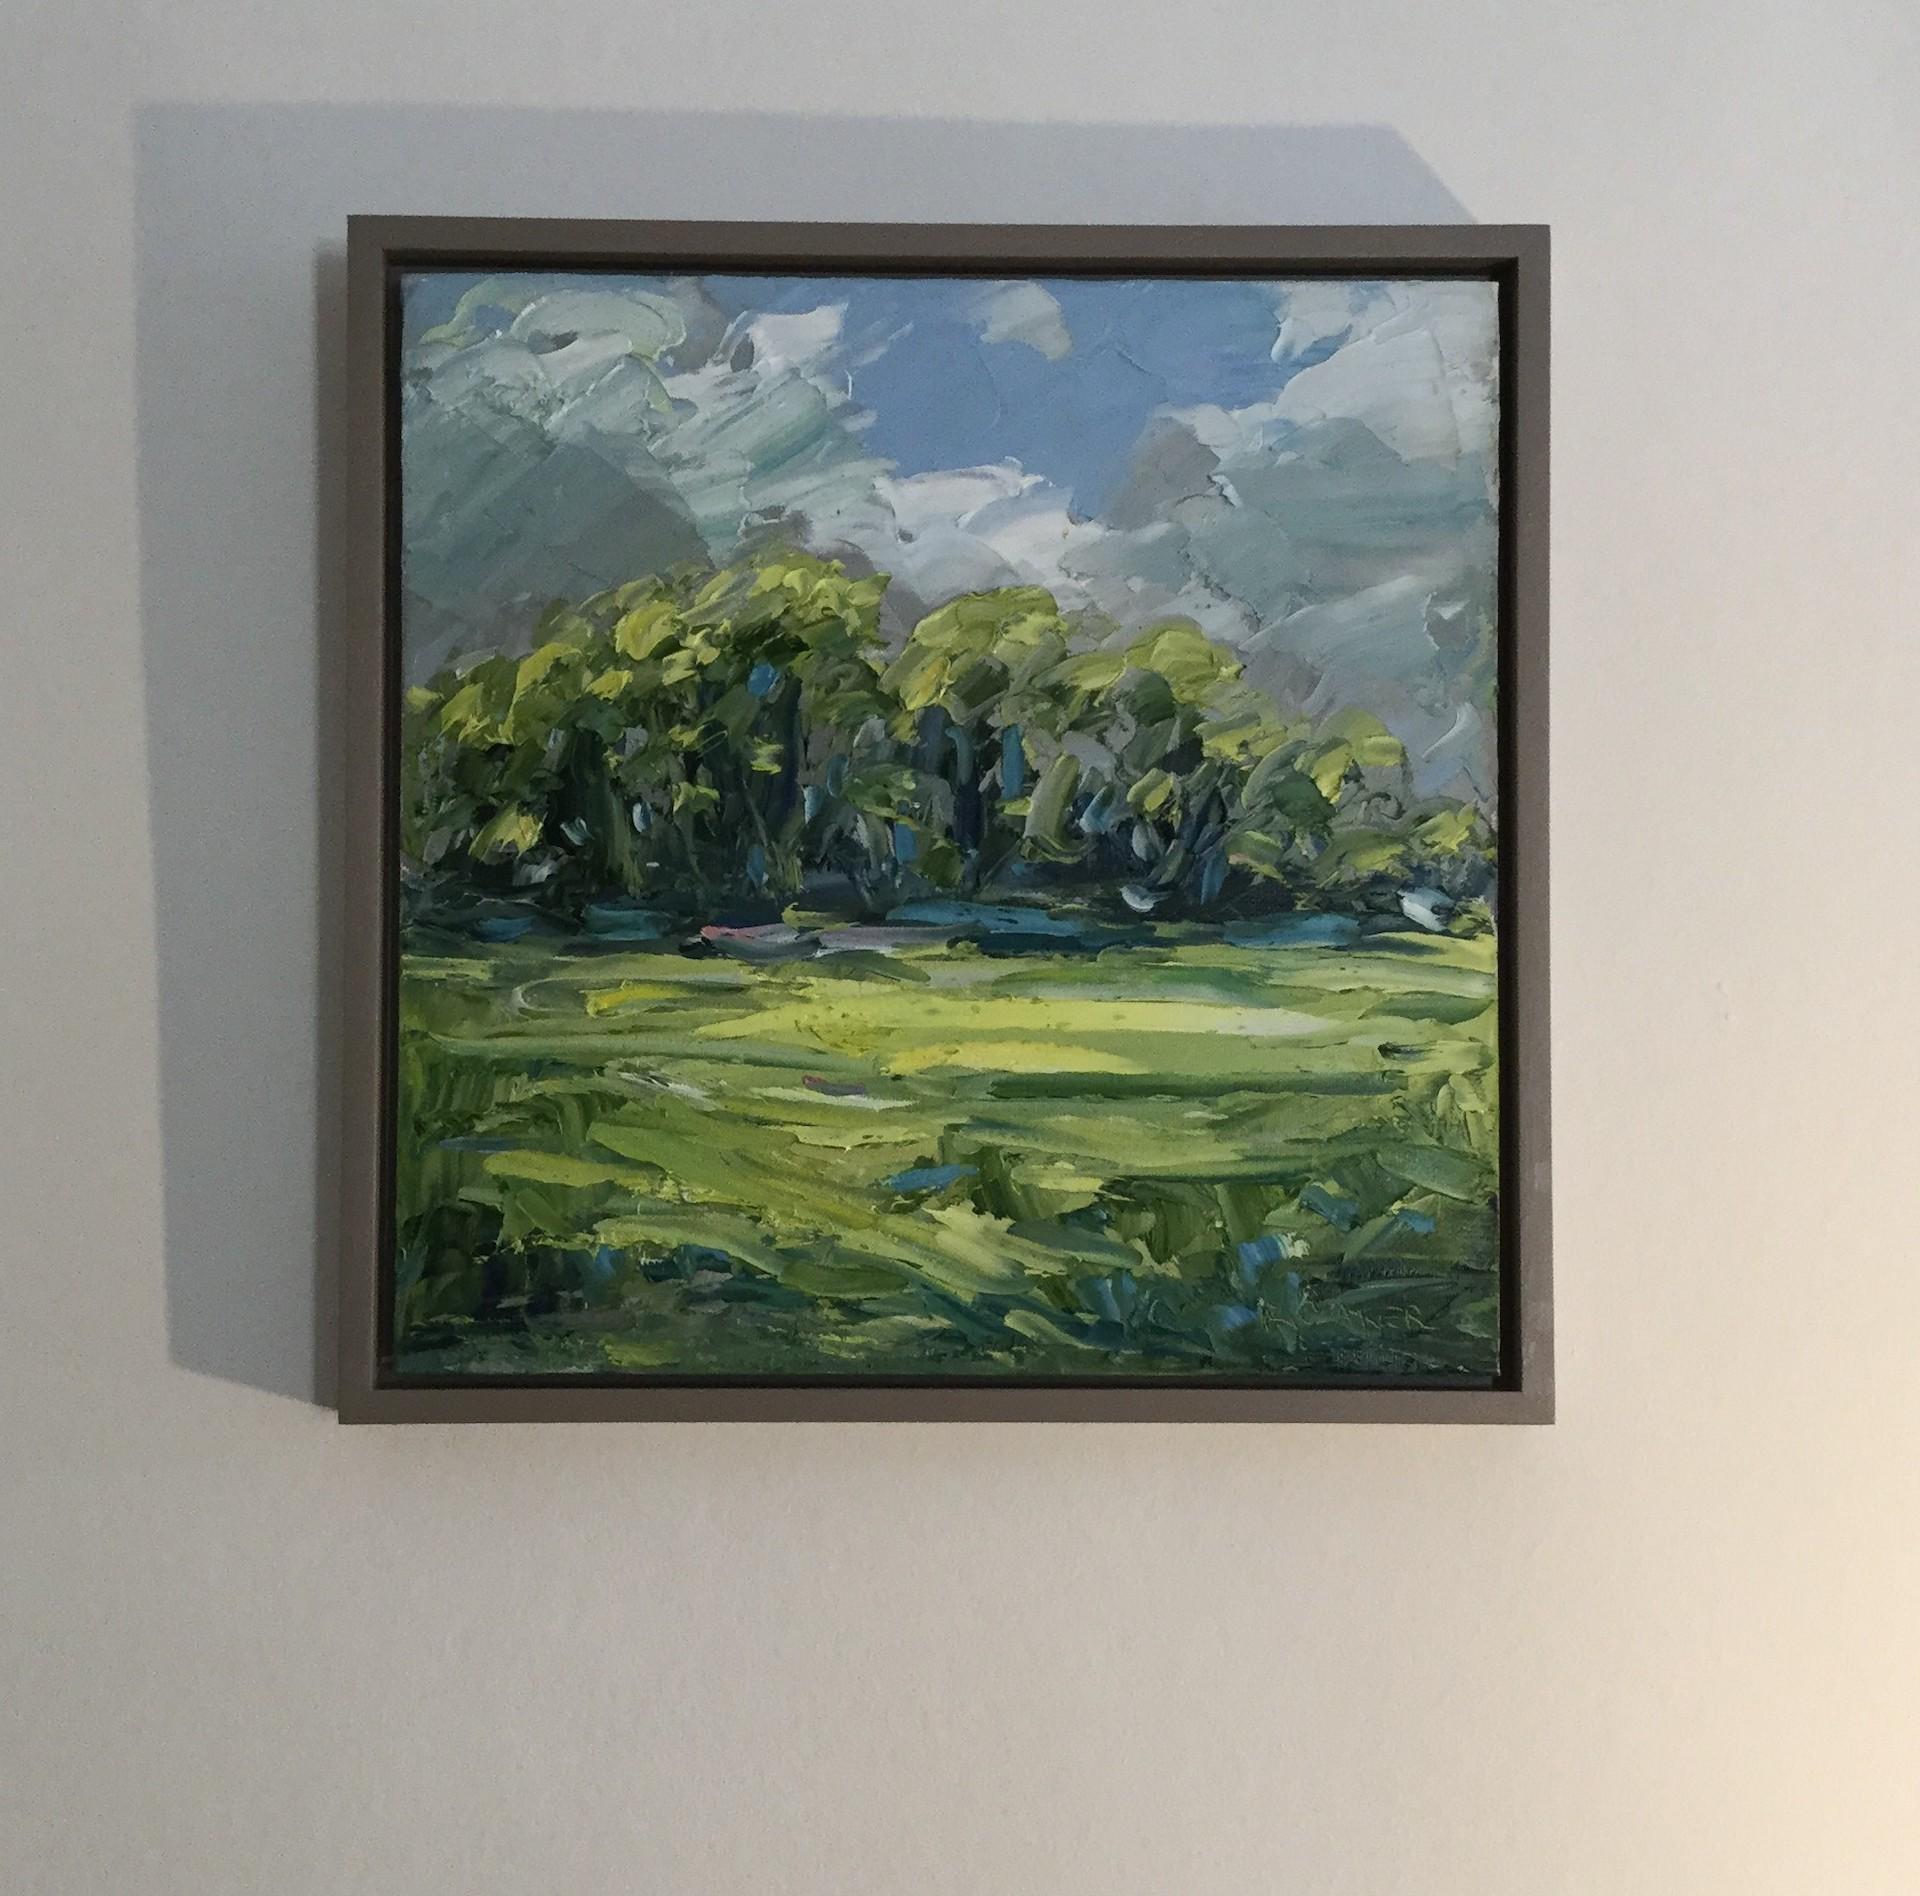 Rupert Aker
Ash Trees in Sprnig
Original Landscape Painting
Oil Paint on Canvas Board
Image Size: H 30.5cm x W 30.5cm
Frame Size: H 33cm x W 33cm x D 3cm
Sold Framed in a Painted Wooden Float Frame
Free Shipping

Ash Trees in Spring is an original